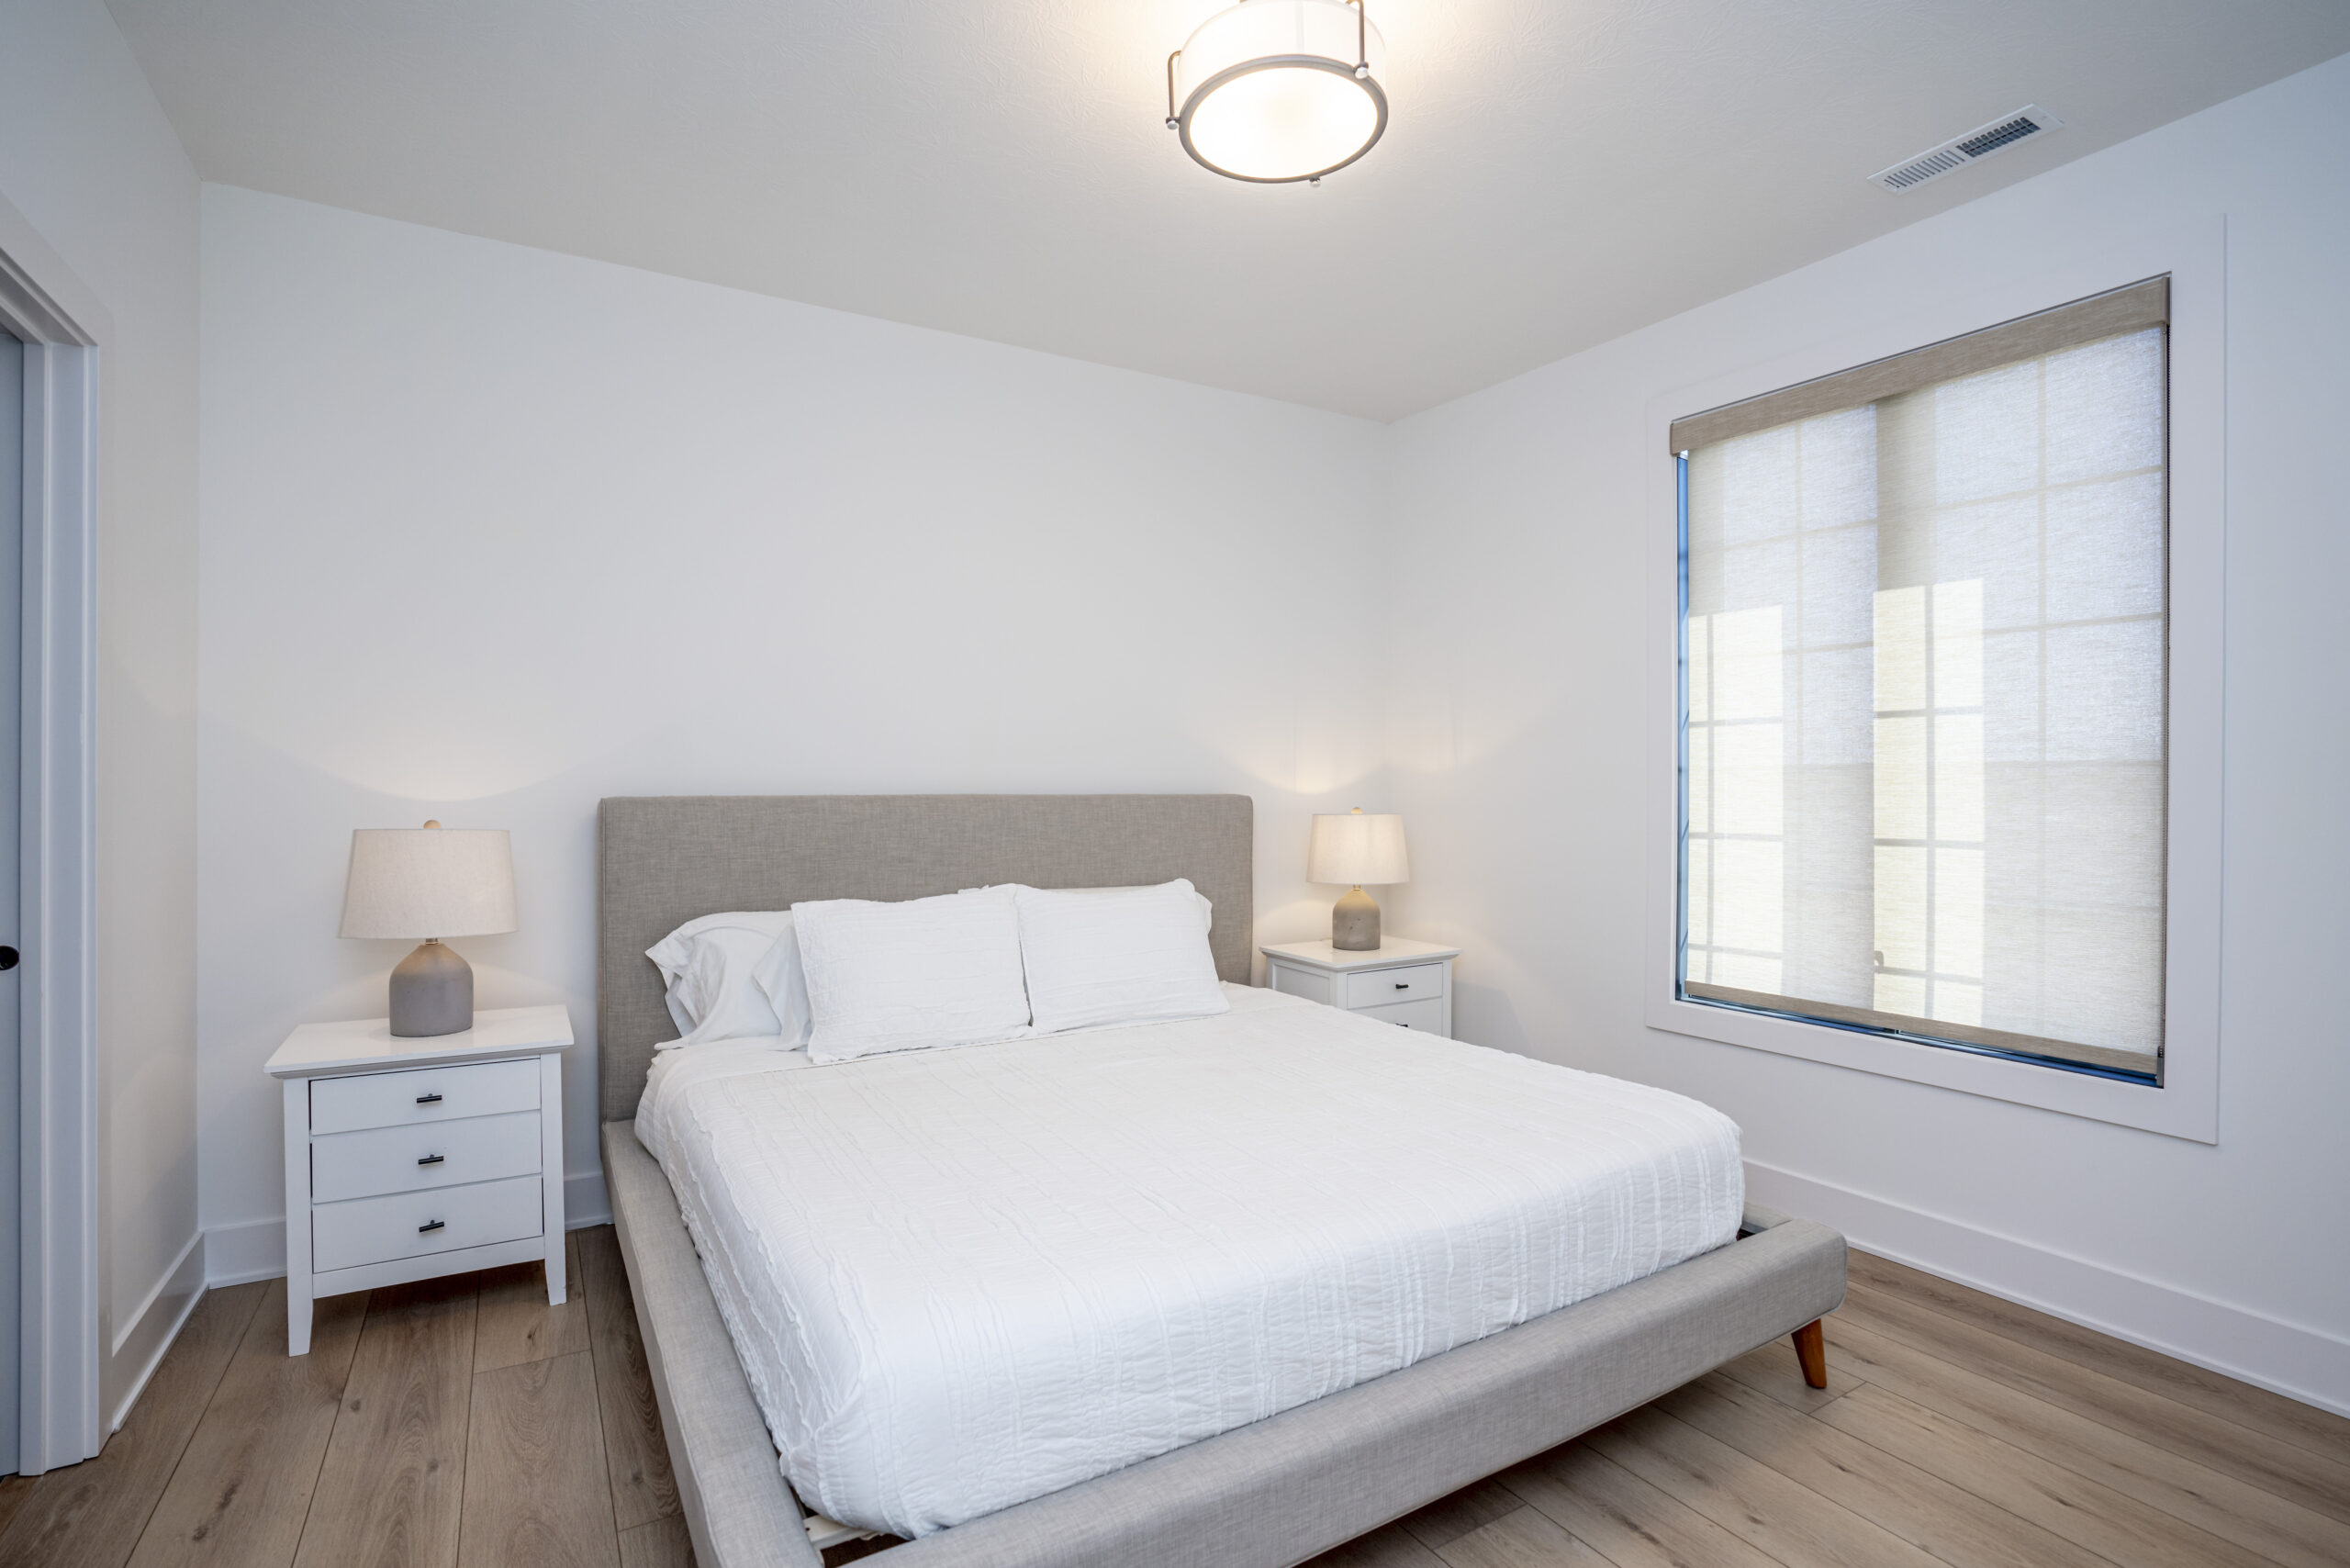 Guest bedroom with roller shades